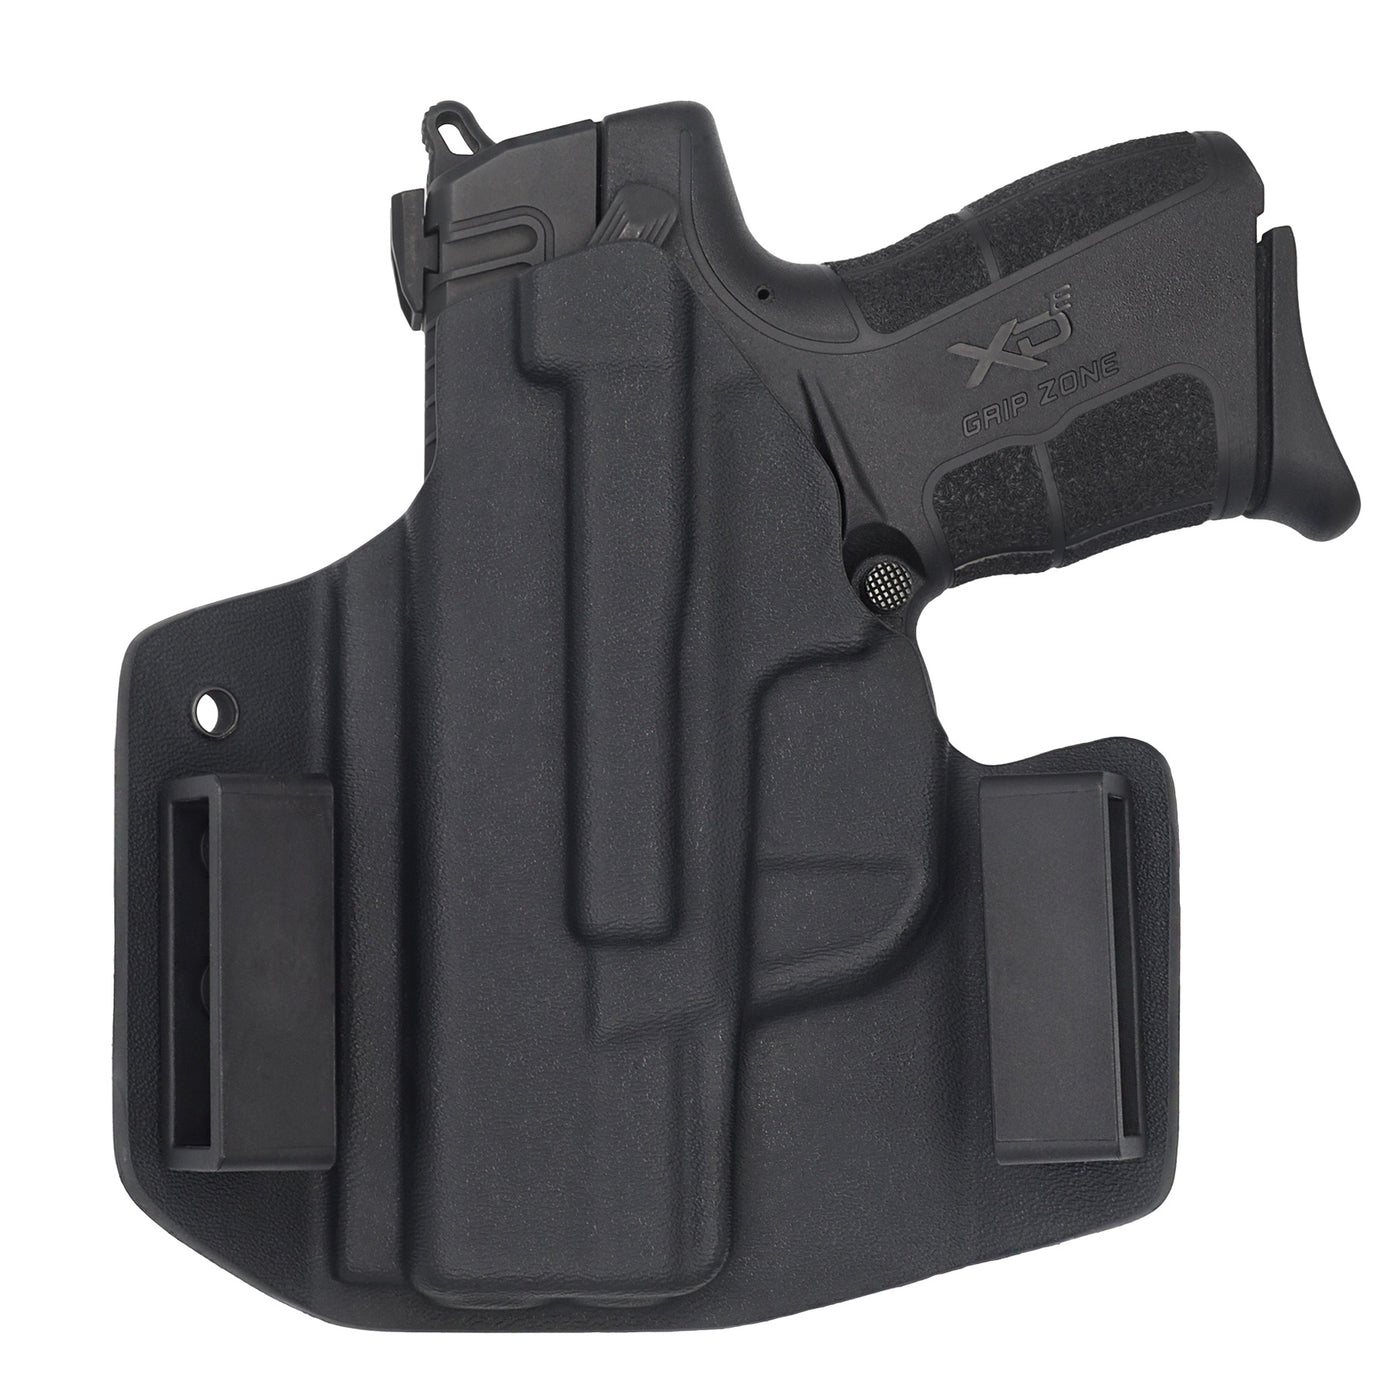 C&G Holsters custom OWB Covert Springfield XDe 3.3" in holstered position back view